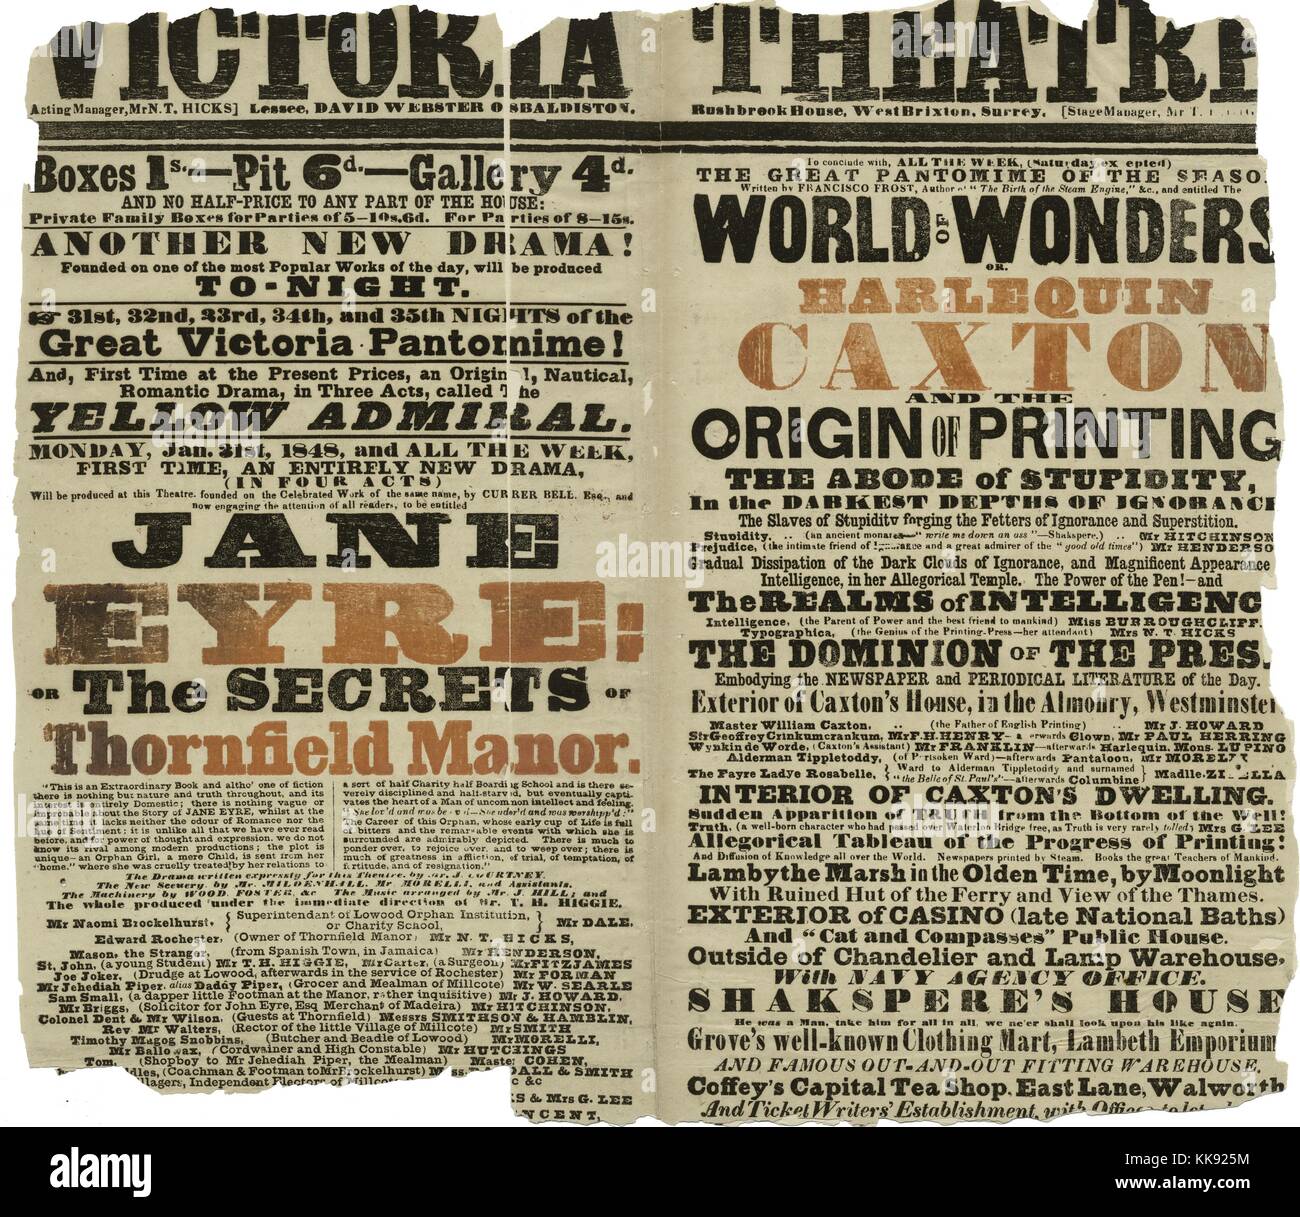 A playbill for the Victoria Theatre, the theatre is more commonly known as The Old Vic, the playbill features Jane Eyre: The Secrets of Thornfield Manor, it was a play written by John Courtney and was the first stage adaptation of Charlotte Bronte's novel Jane Eyre, it was staged a year after the release of the novel, the opposite gives detail of the themes and sets of a show called Harlequin Caxton and the World of Printing, the Old Vic was originally built in 1818 and was rebuilt in 1871, 1848. From the New York Public Library. Stock Photo